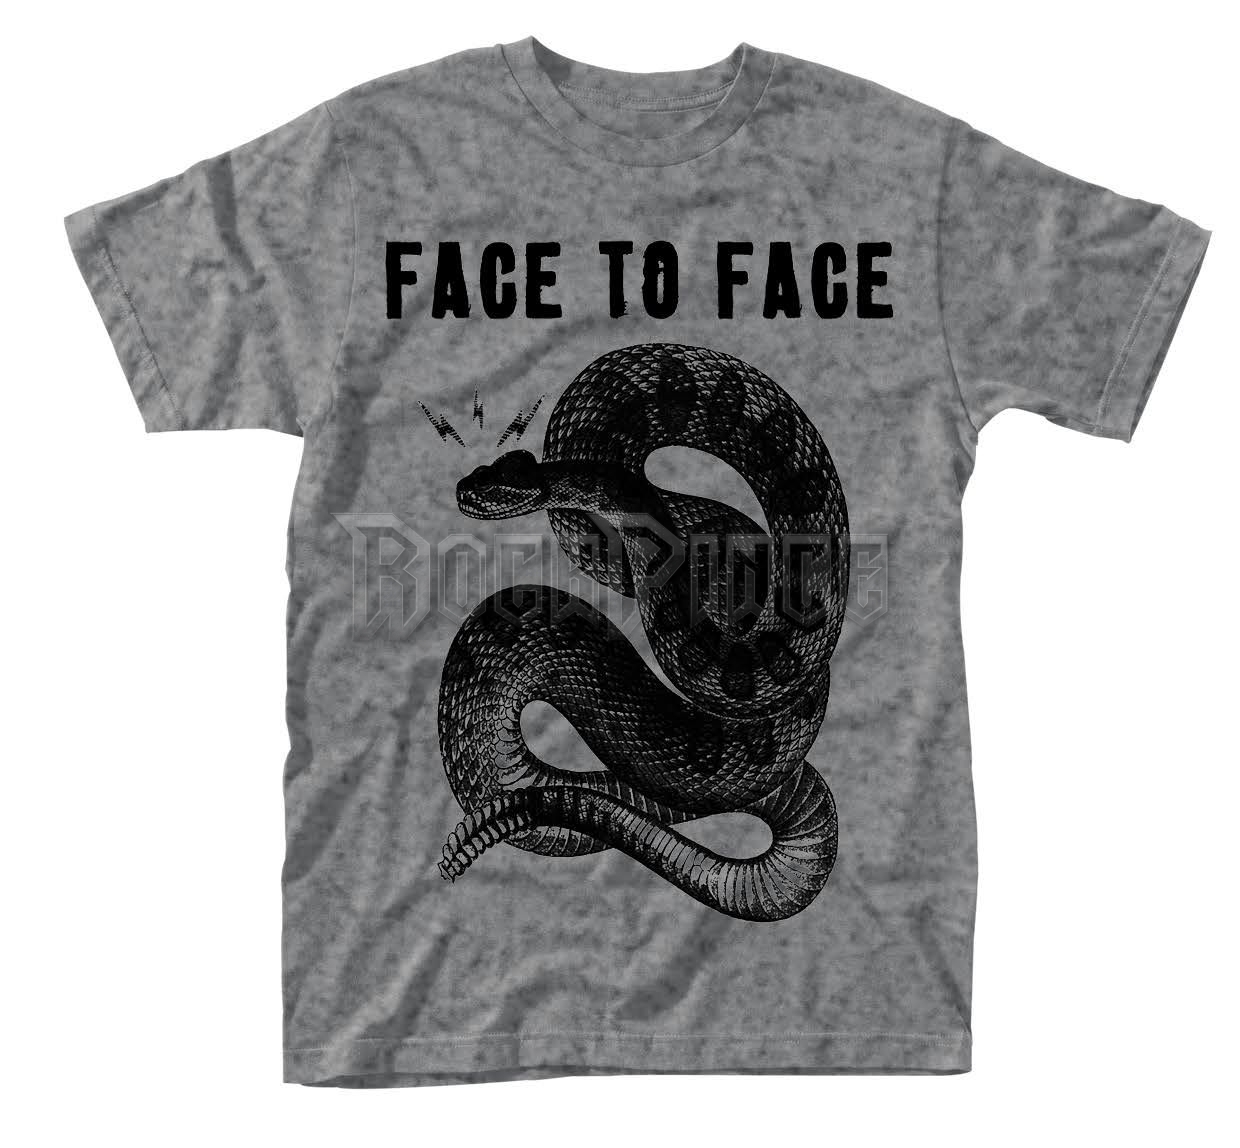 FACE TO FACE - SNAKE - PH9883